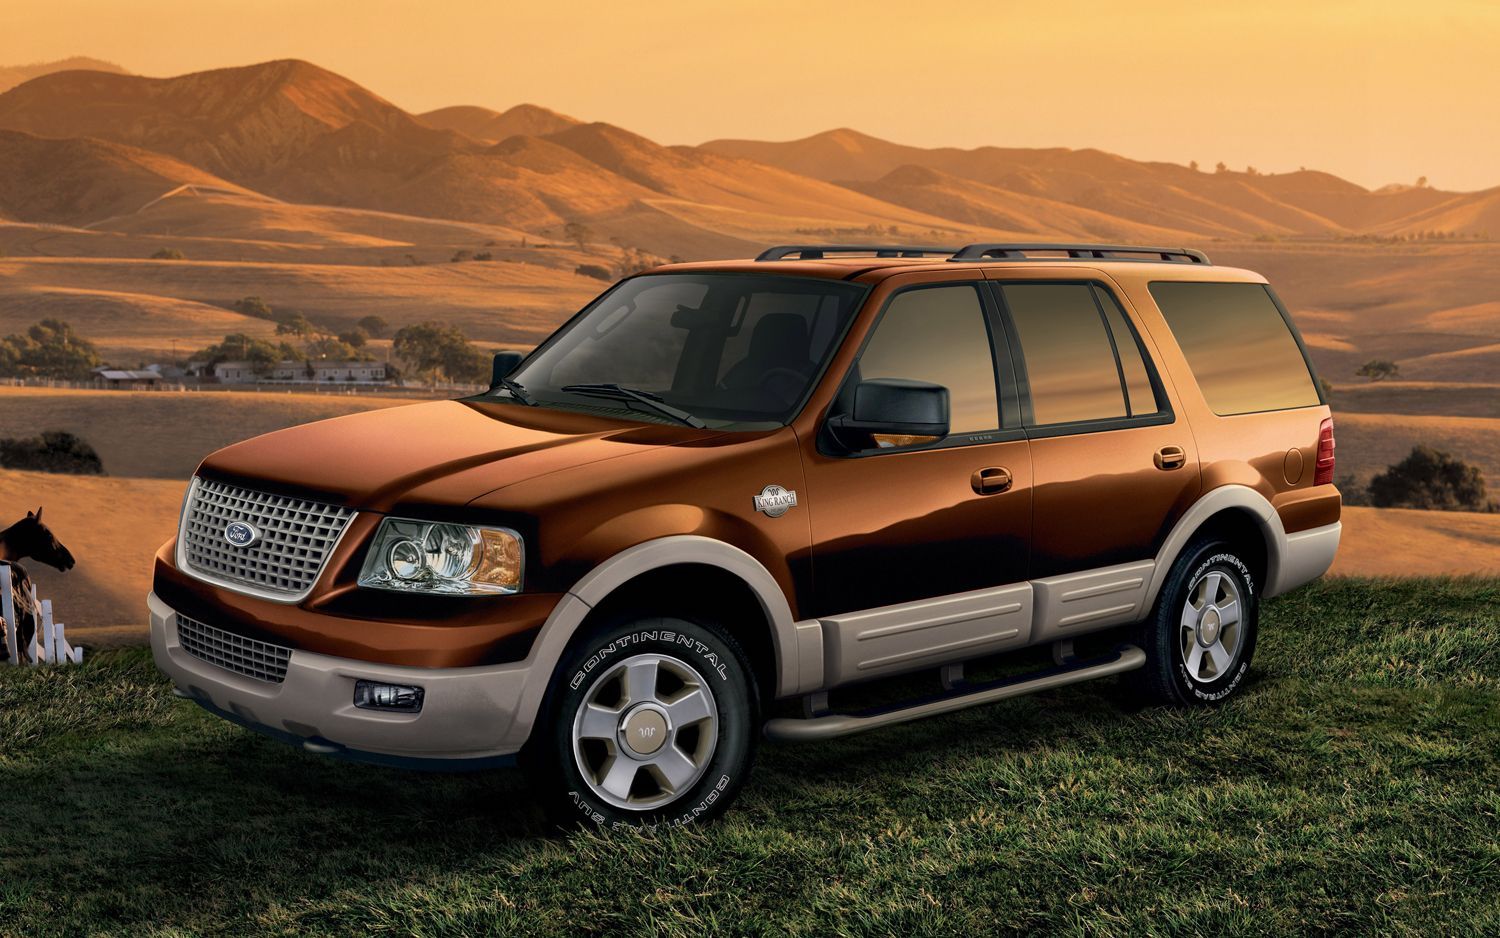 2005 Ford Expedition Among Best SUVs Under $5,000